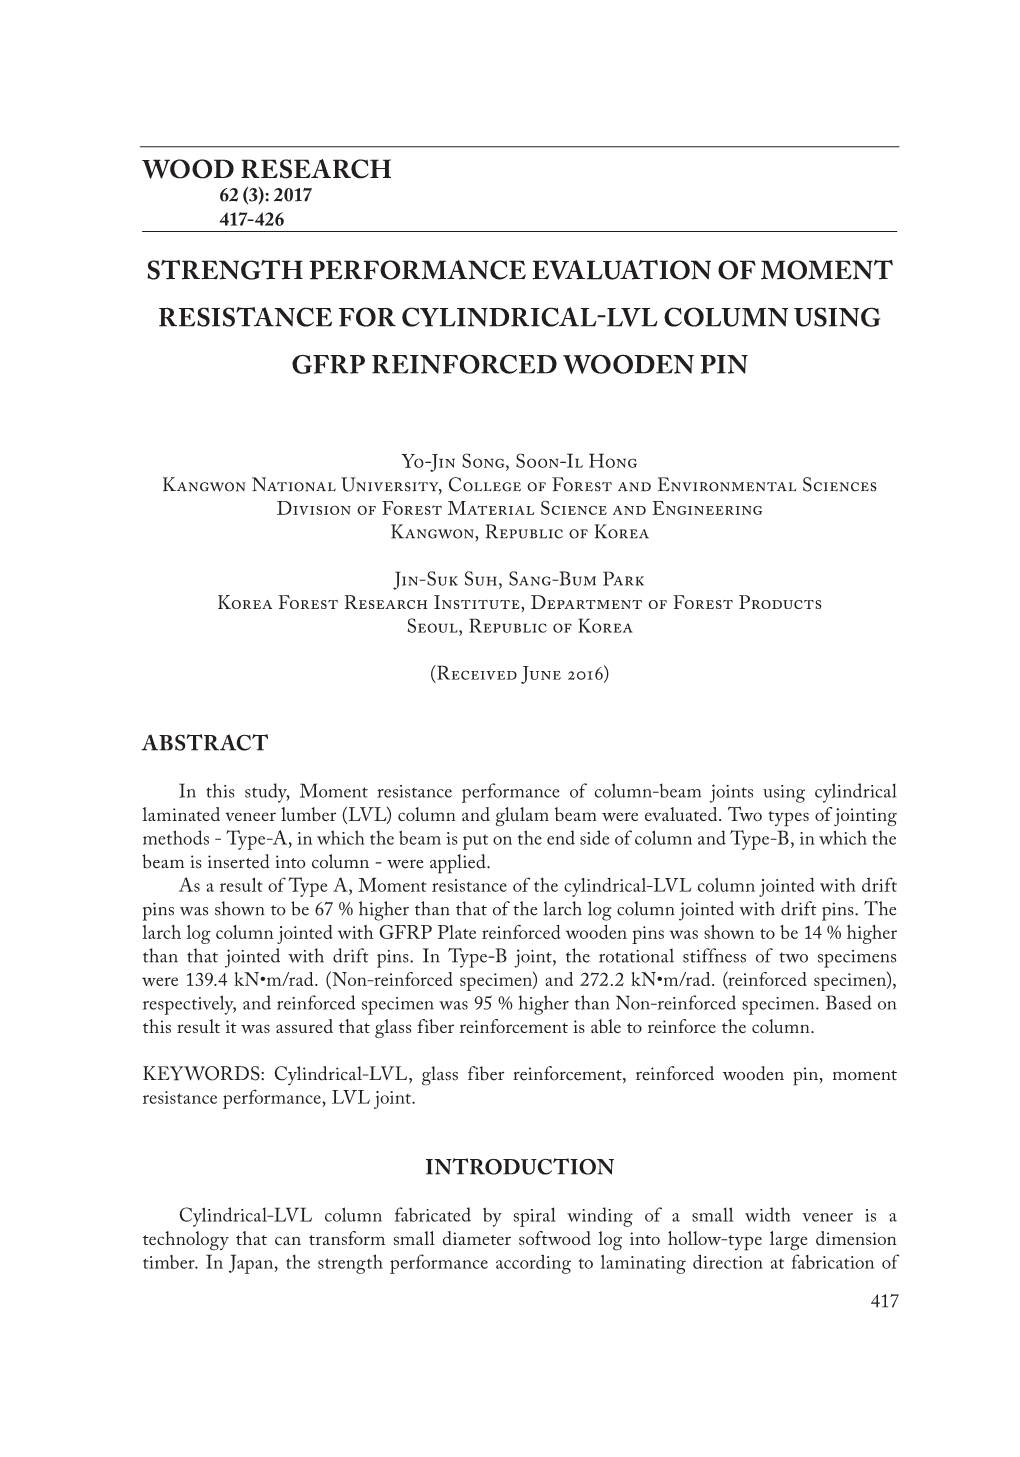 Strength Performance Evaluation of Moment Resistance for Cylindrical-Lvl Column Using Gfrp Reinforced Wooden Pin